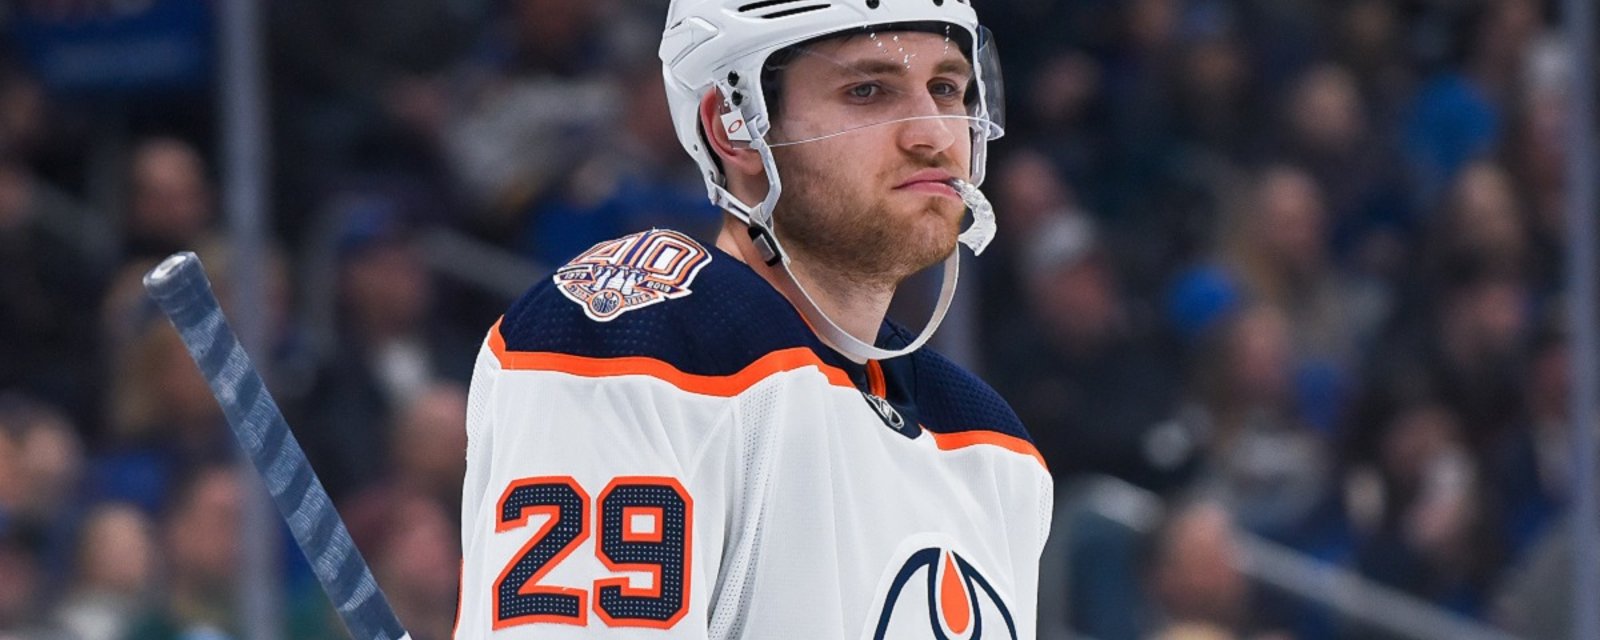 Agent for Laine, Draisaitl, with a terrible update on NHL/NHLPA negotiations.